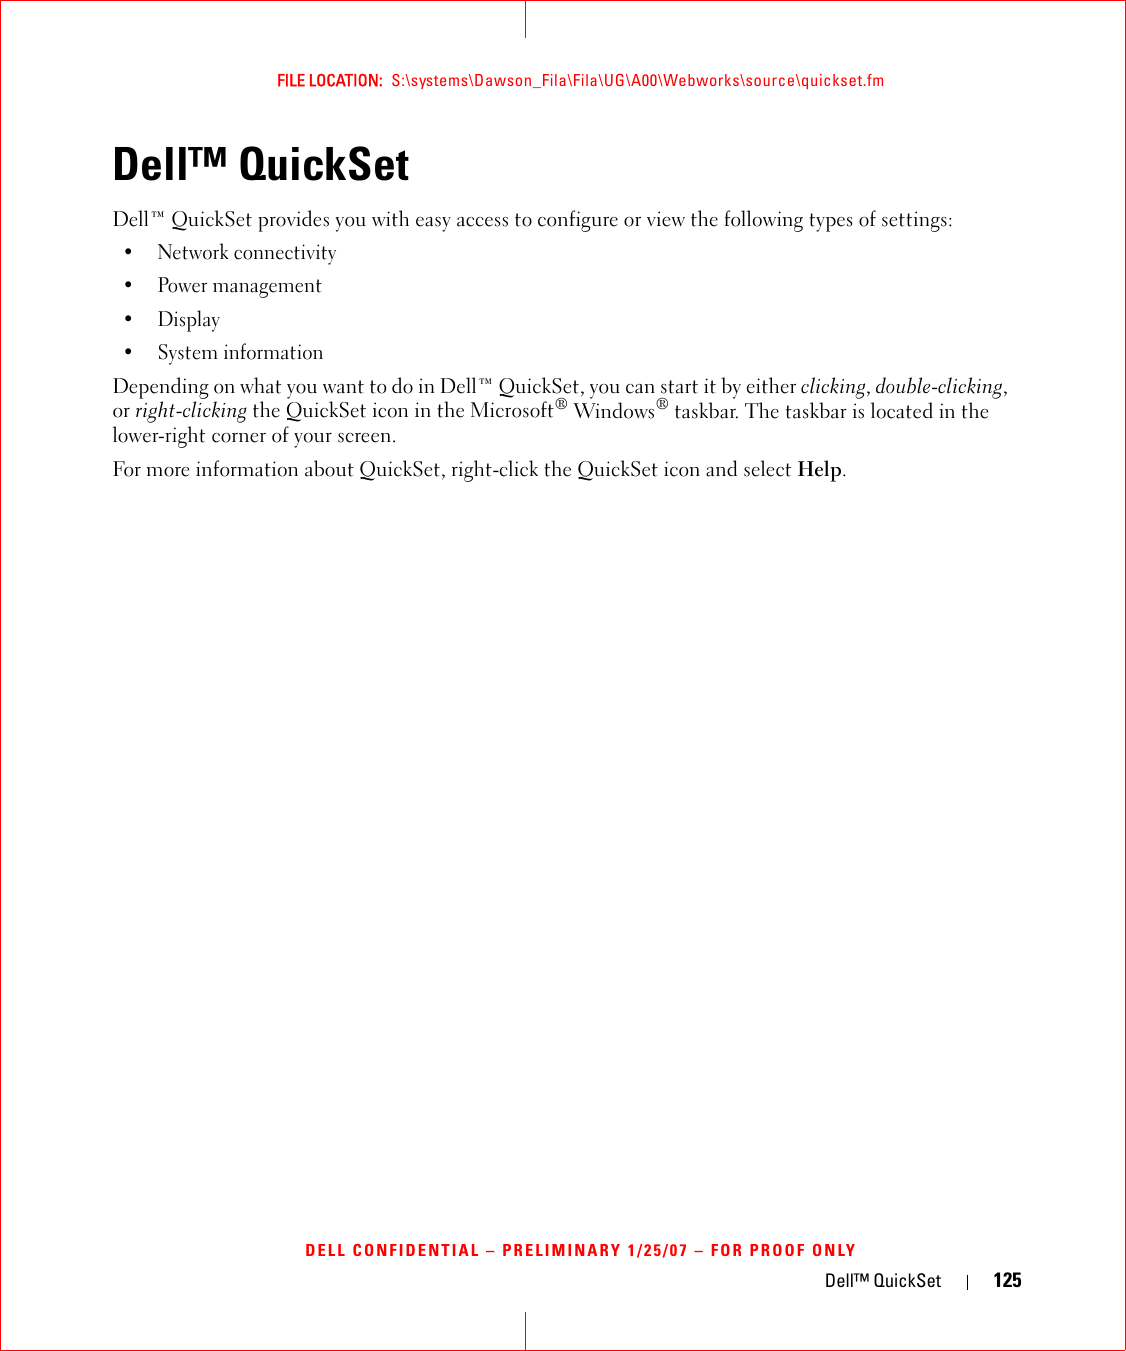 Dell™ QuickSet 125FILE LOCATION:  S:\systems\Dawson_Fila\Fila\UG\A00\Webworks\source\quickset.fmDELL CONFIDENTIAL – PRELIMINARY 1/25/07 – FOR PROOF ONLYDell™ QuickSet Dell™ QuickSet provides you with easy access to configure or view the following types of settings:• Network connectivity• Power management•Display• System informationDepending on what you want to do in Dell™ QuickSet, you can start it by either clicking, double-clicking, or right-clicking the QuickSet icon in the Microsoft® Windows® taskbar. The taskbar is located in the lower-right corner of your screen.For more information about QuickSet, right-click the QuickSet icon and select Help.